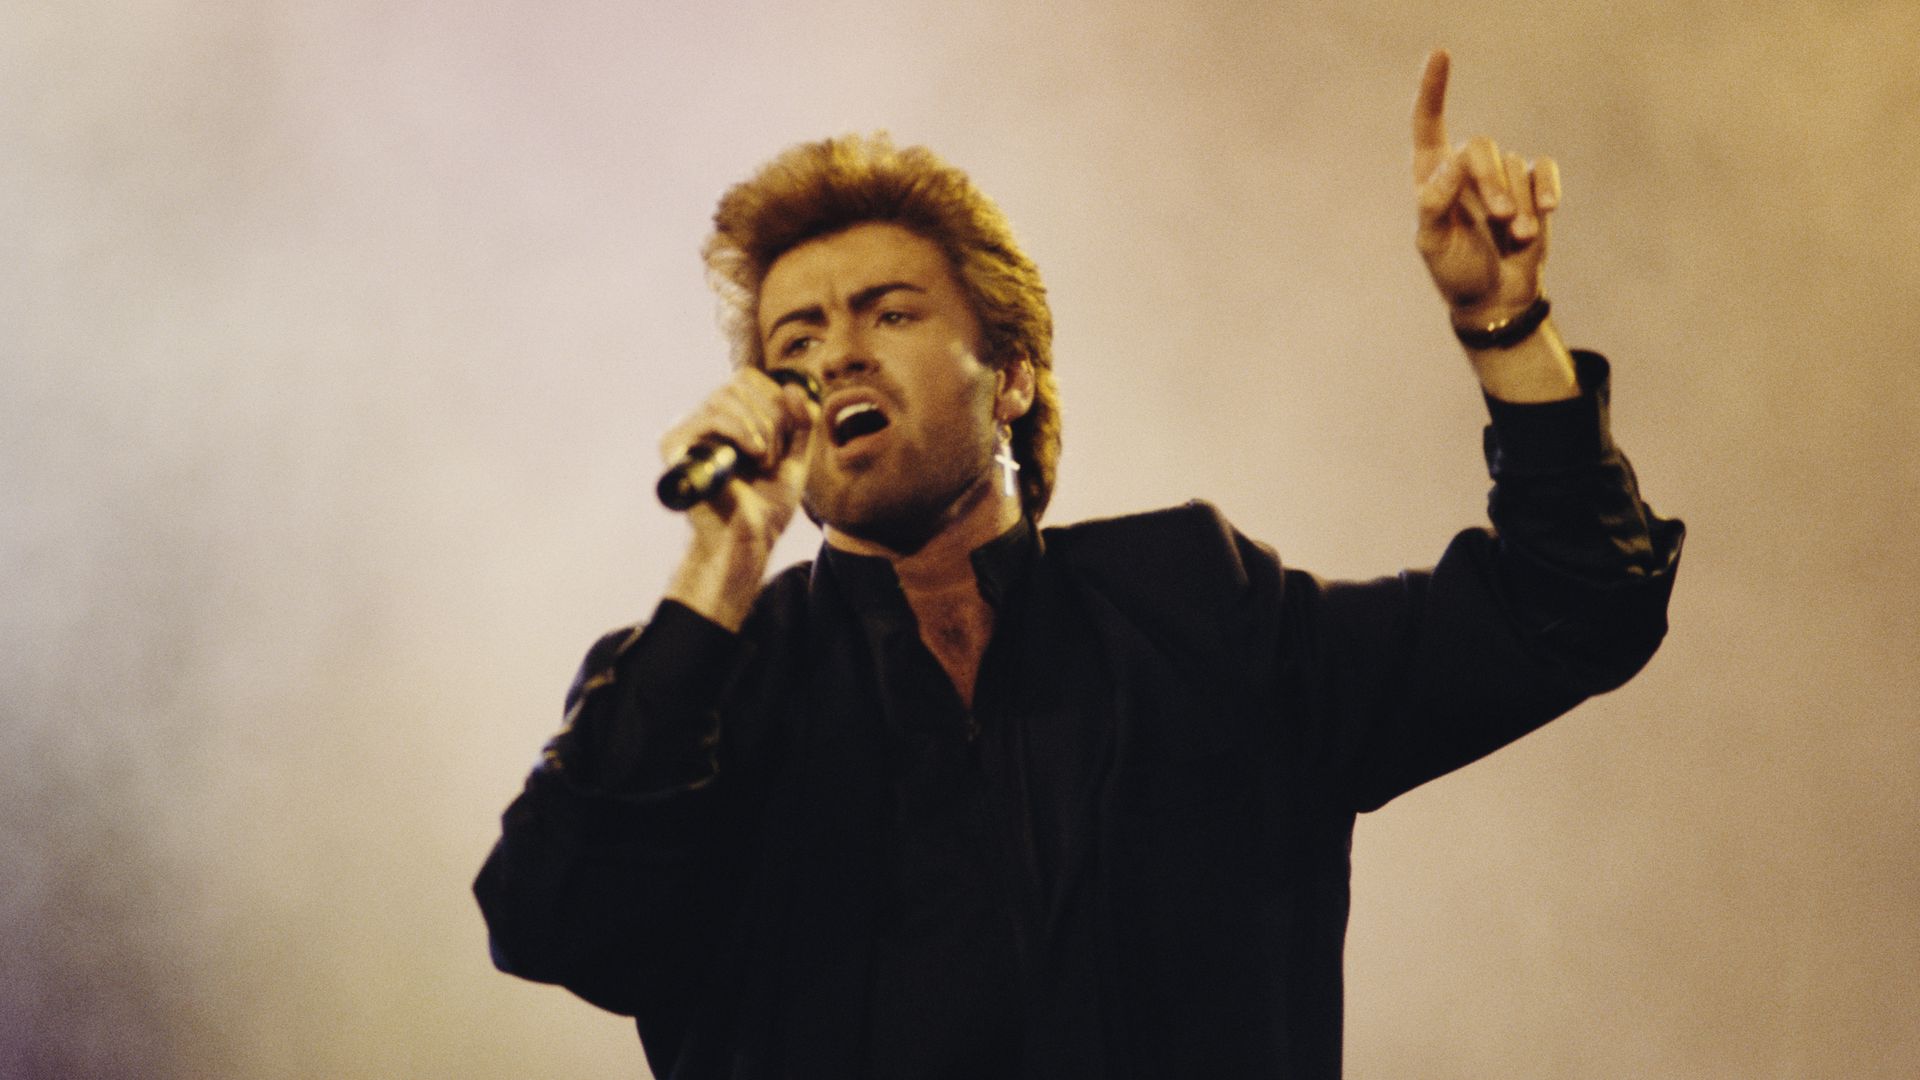 Singer George Michael sings into a microphone. 